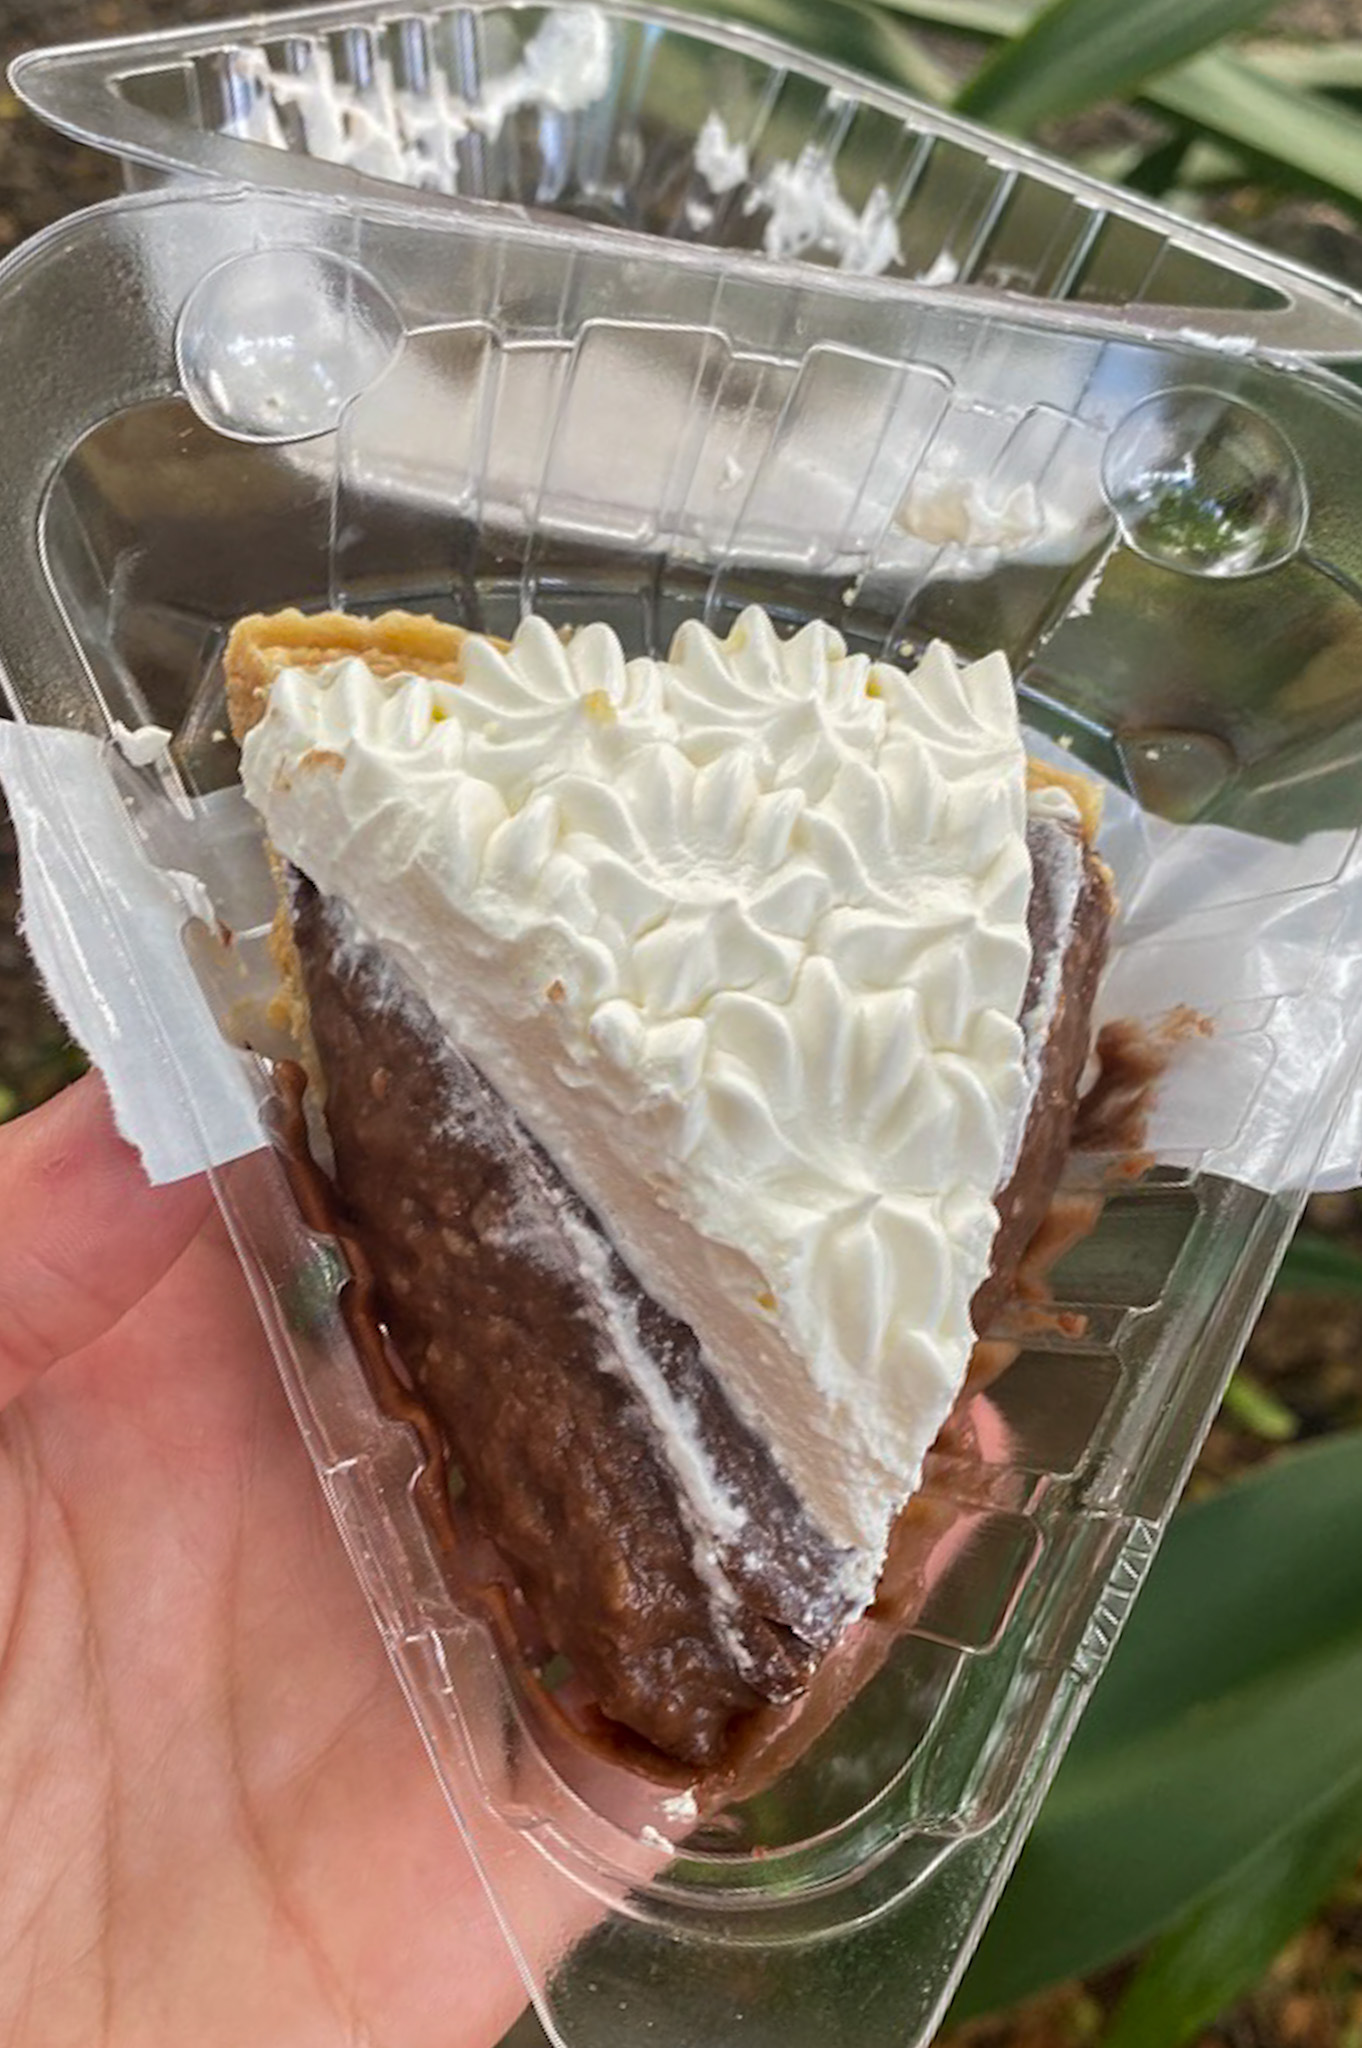 Chocolate Haupia Cream Pie from Ted's Bakery on Oahu's North Shore - best lunch spots for Hawaii foodies